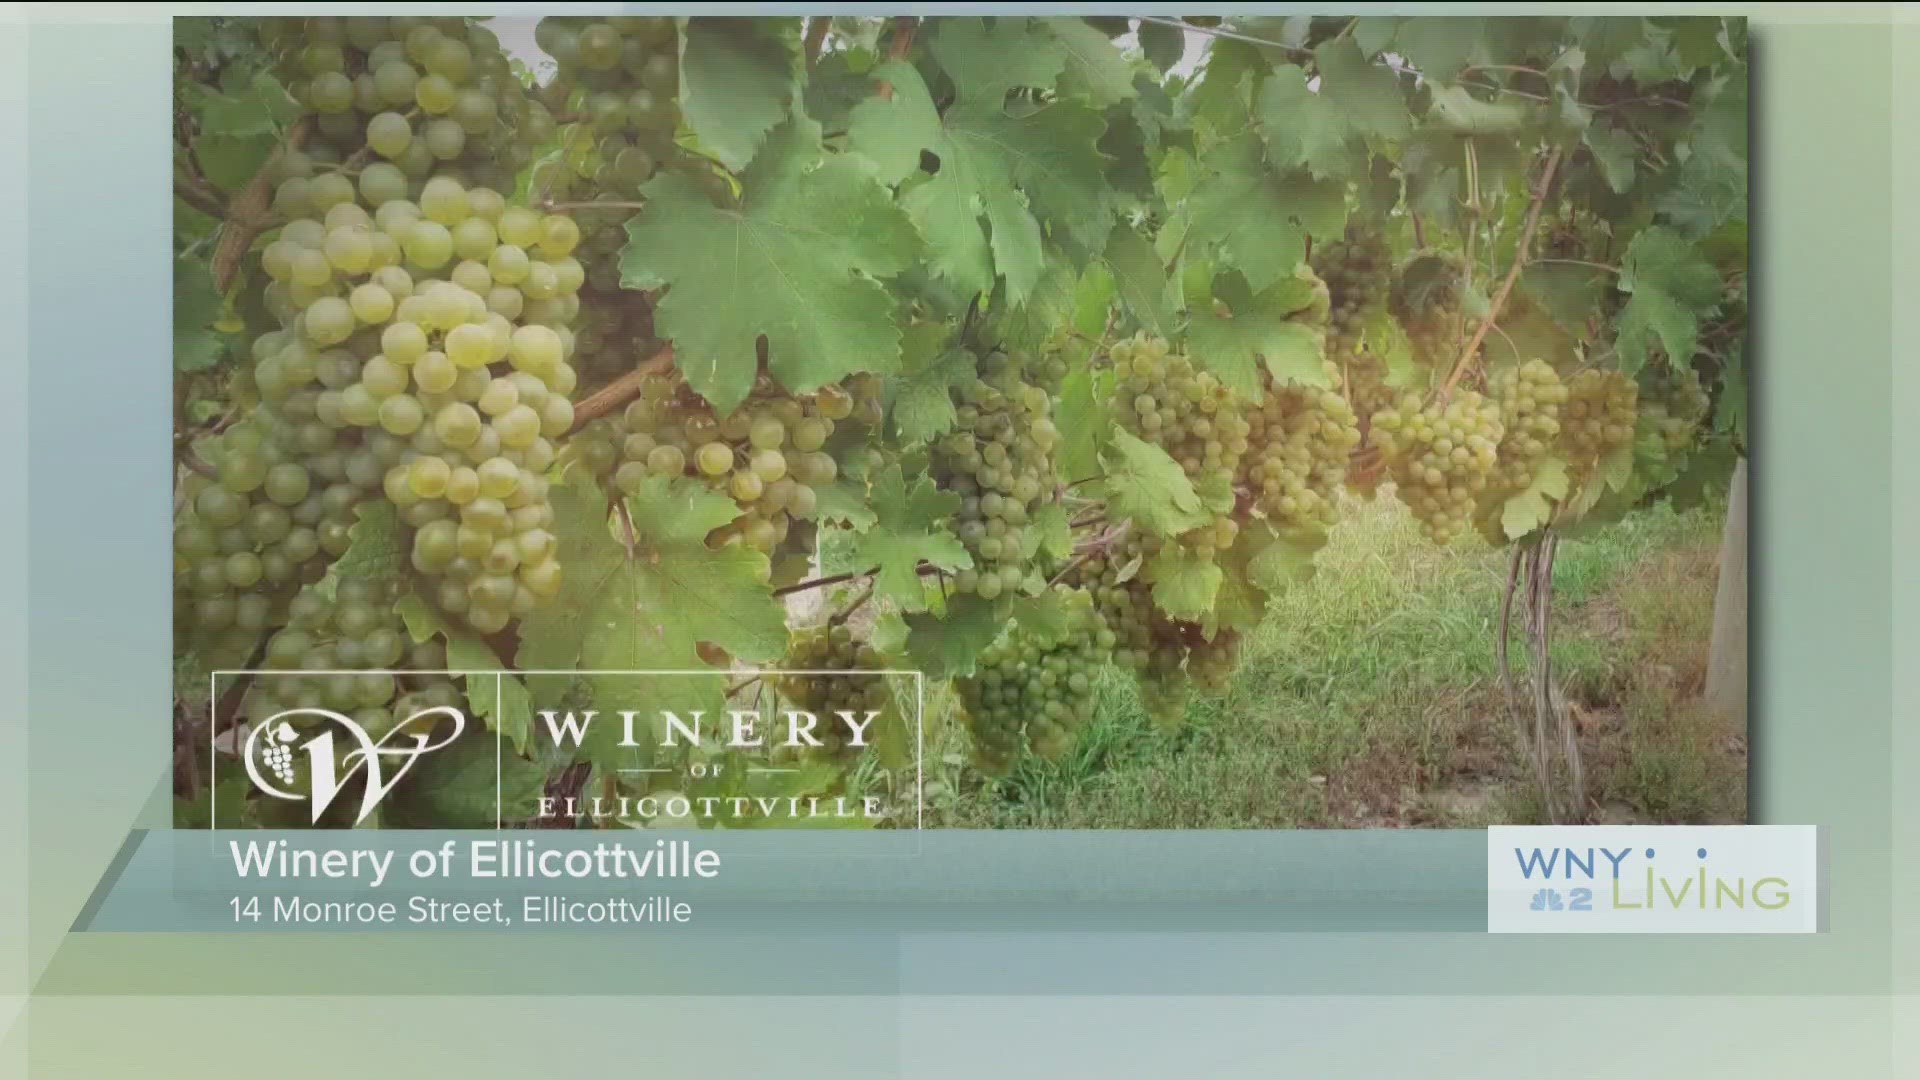 May 13th - Winery of Ellicottvile (THIS VIDEO IS SPONSORED BY WINERY OF ELLICOTTVILLE)